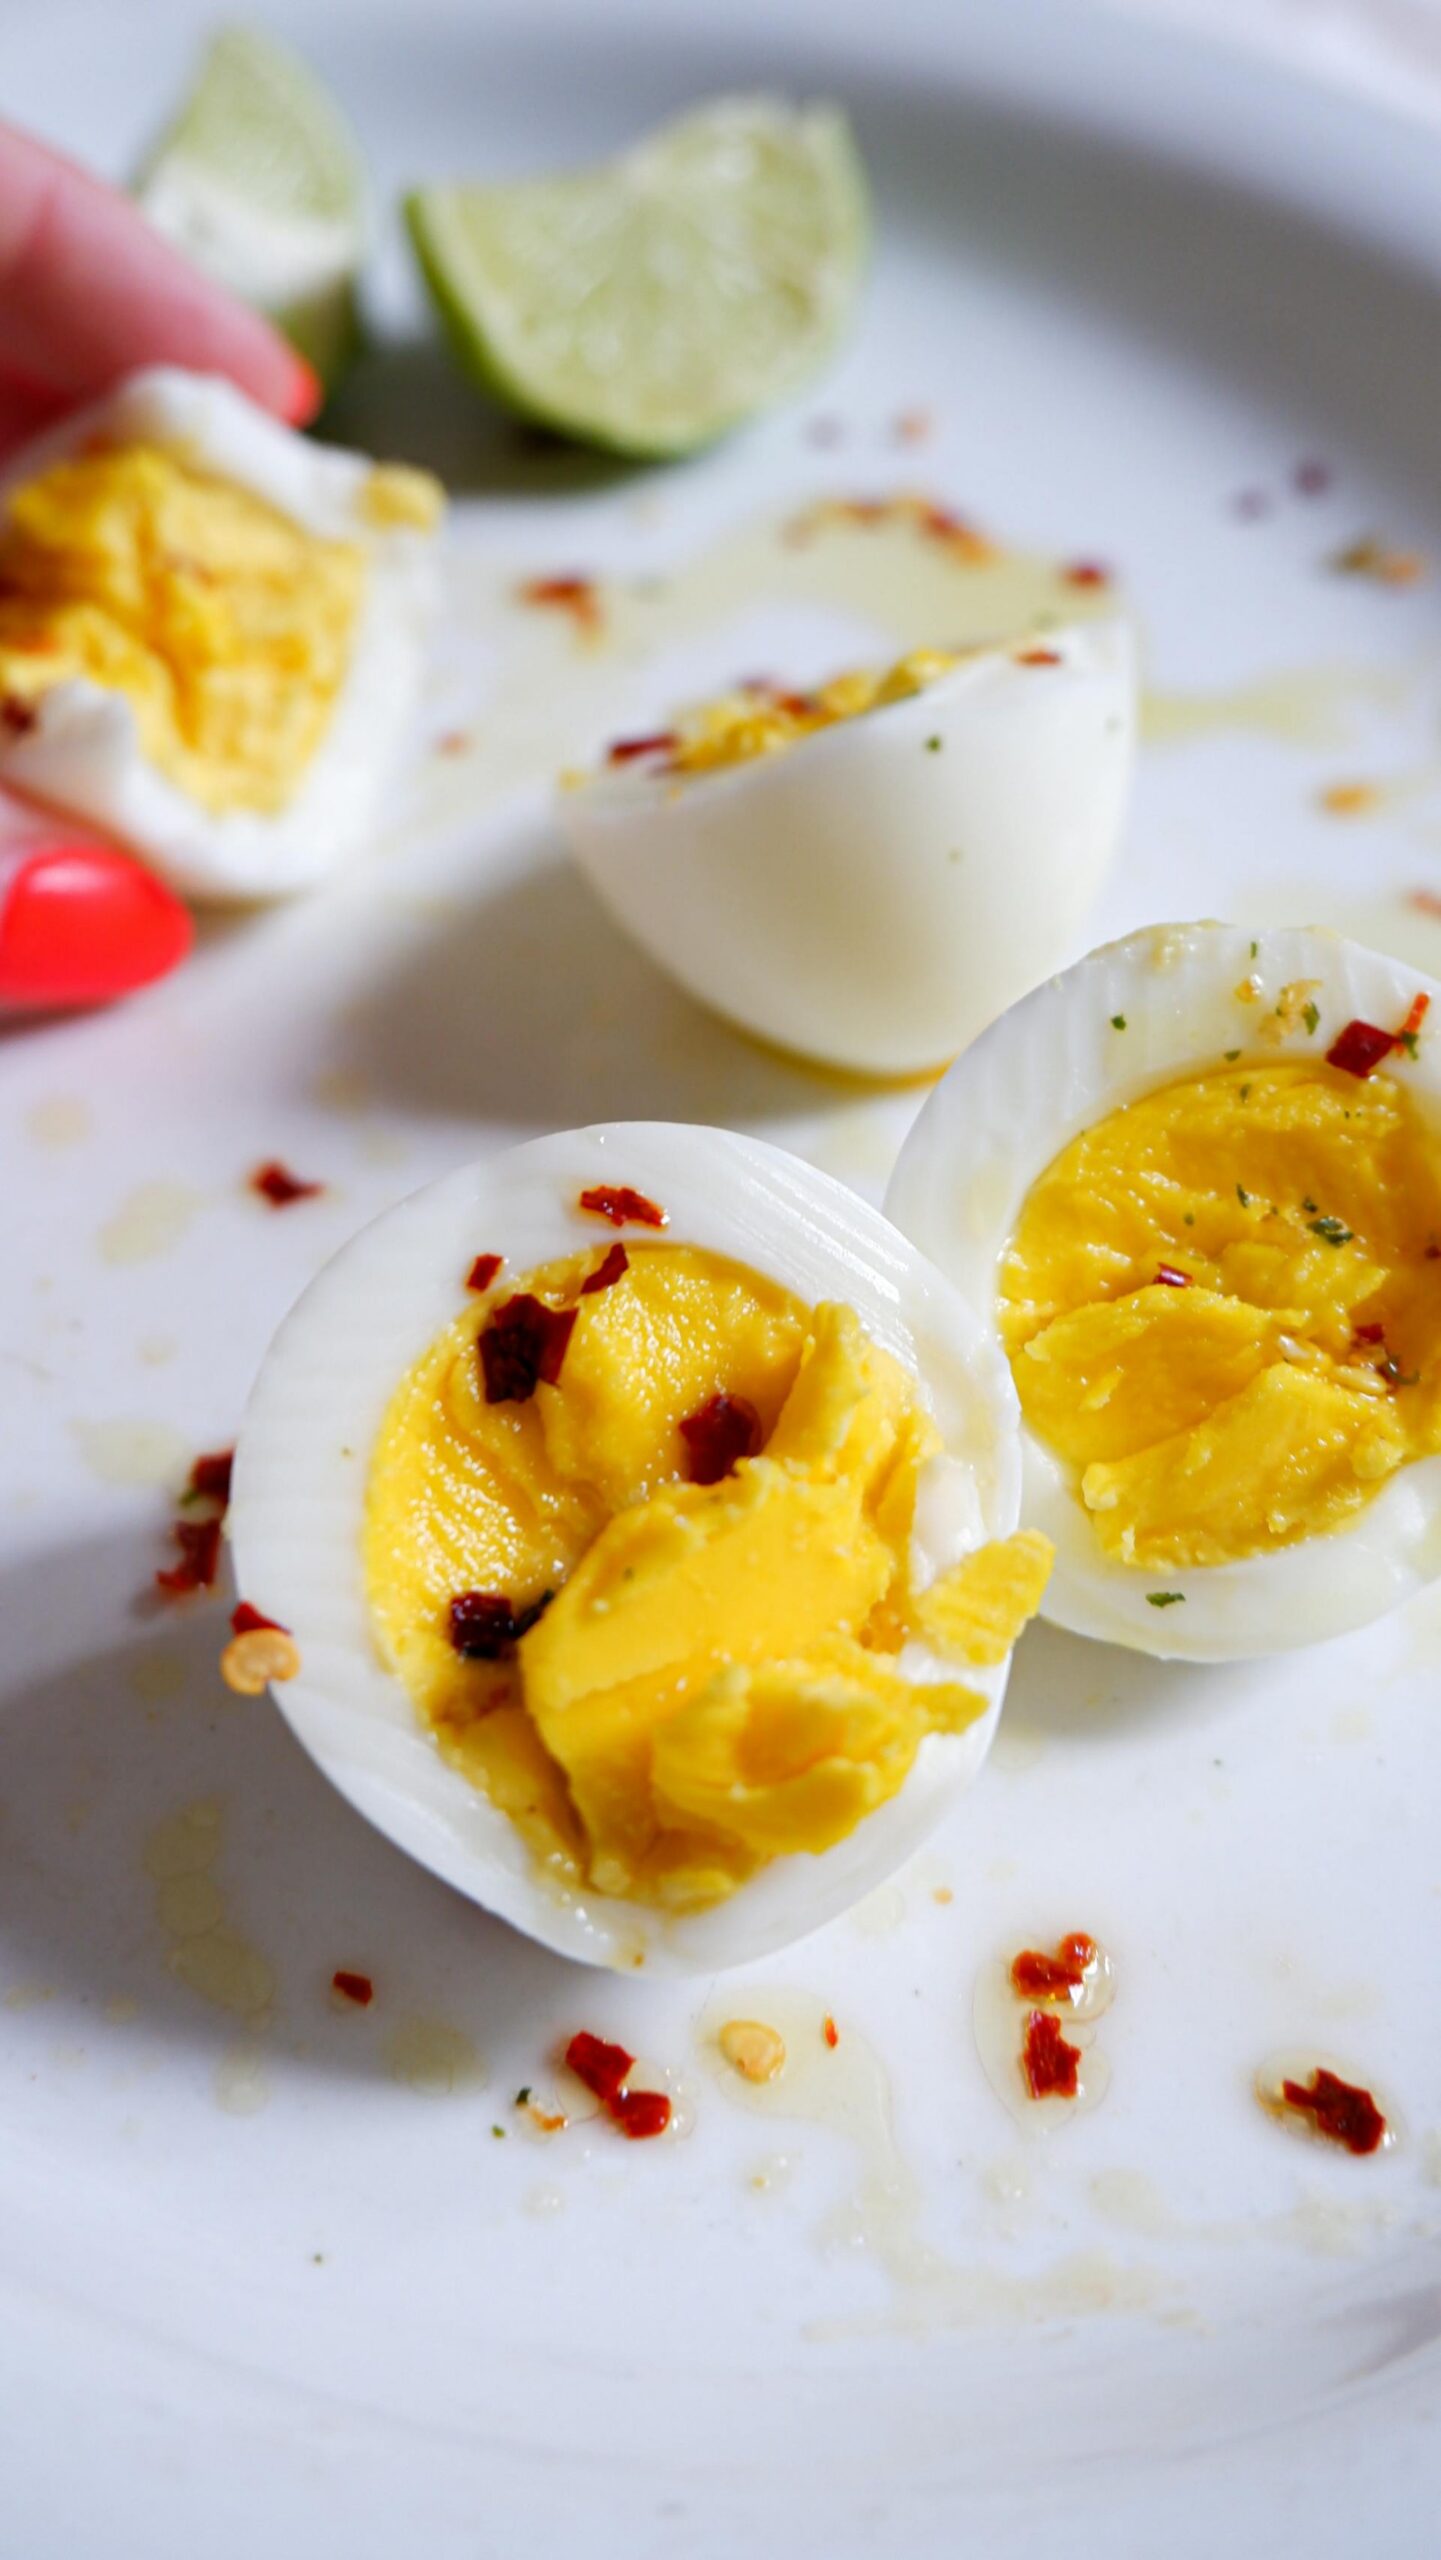 Boiled eggs cut in half with red pepper flakes.